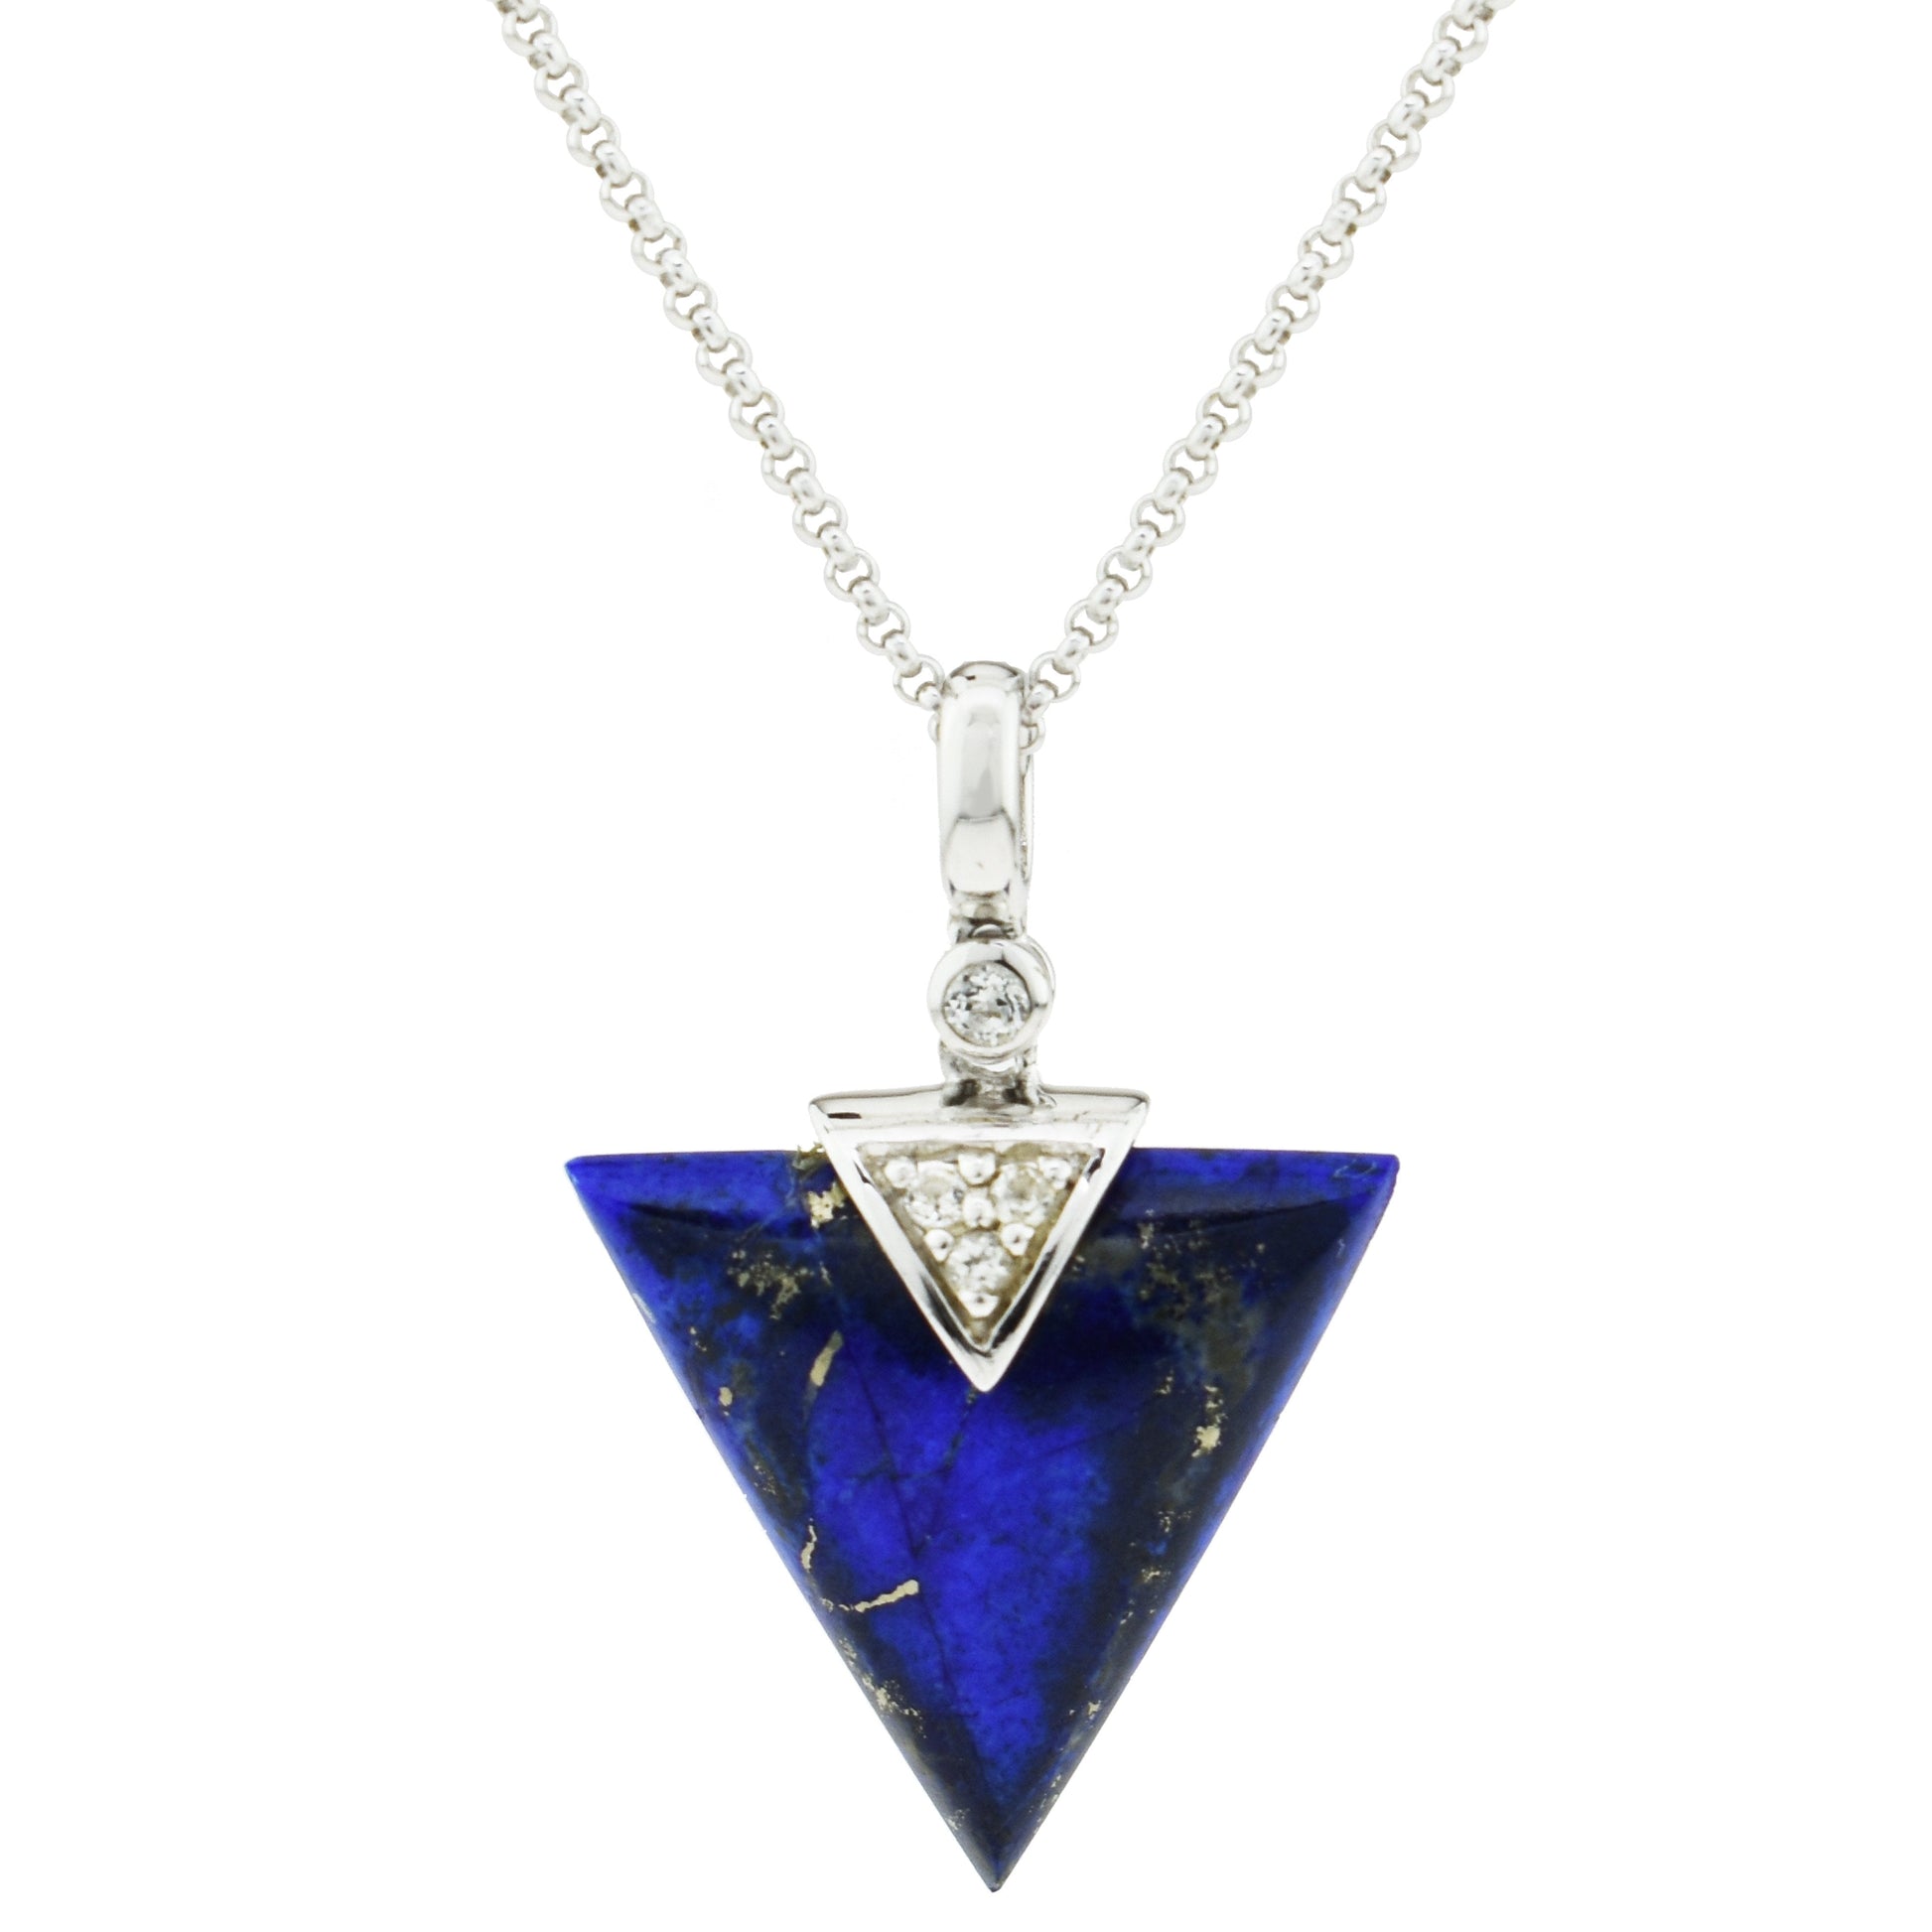 Sterling Silver White Topaz Lapis Triangle Pend Necklace 18" freeshipping - Jewelmak Shop